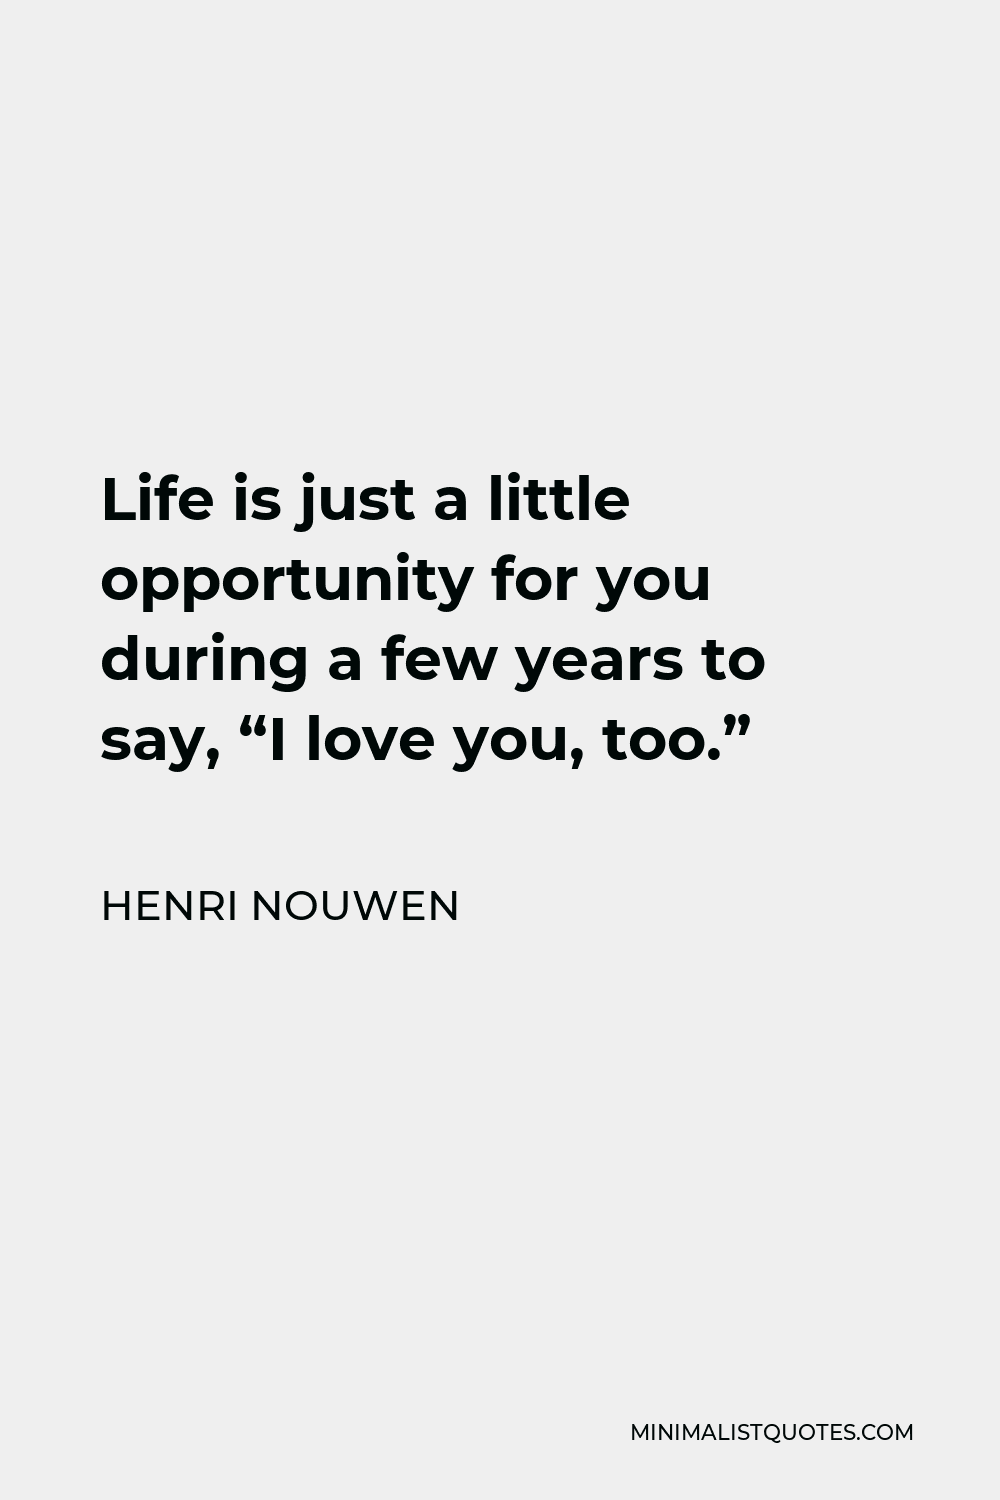 Henri Nouwen Quote - Life is just a little opportunity for you during a few years to say, “I love you, too.”